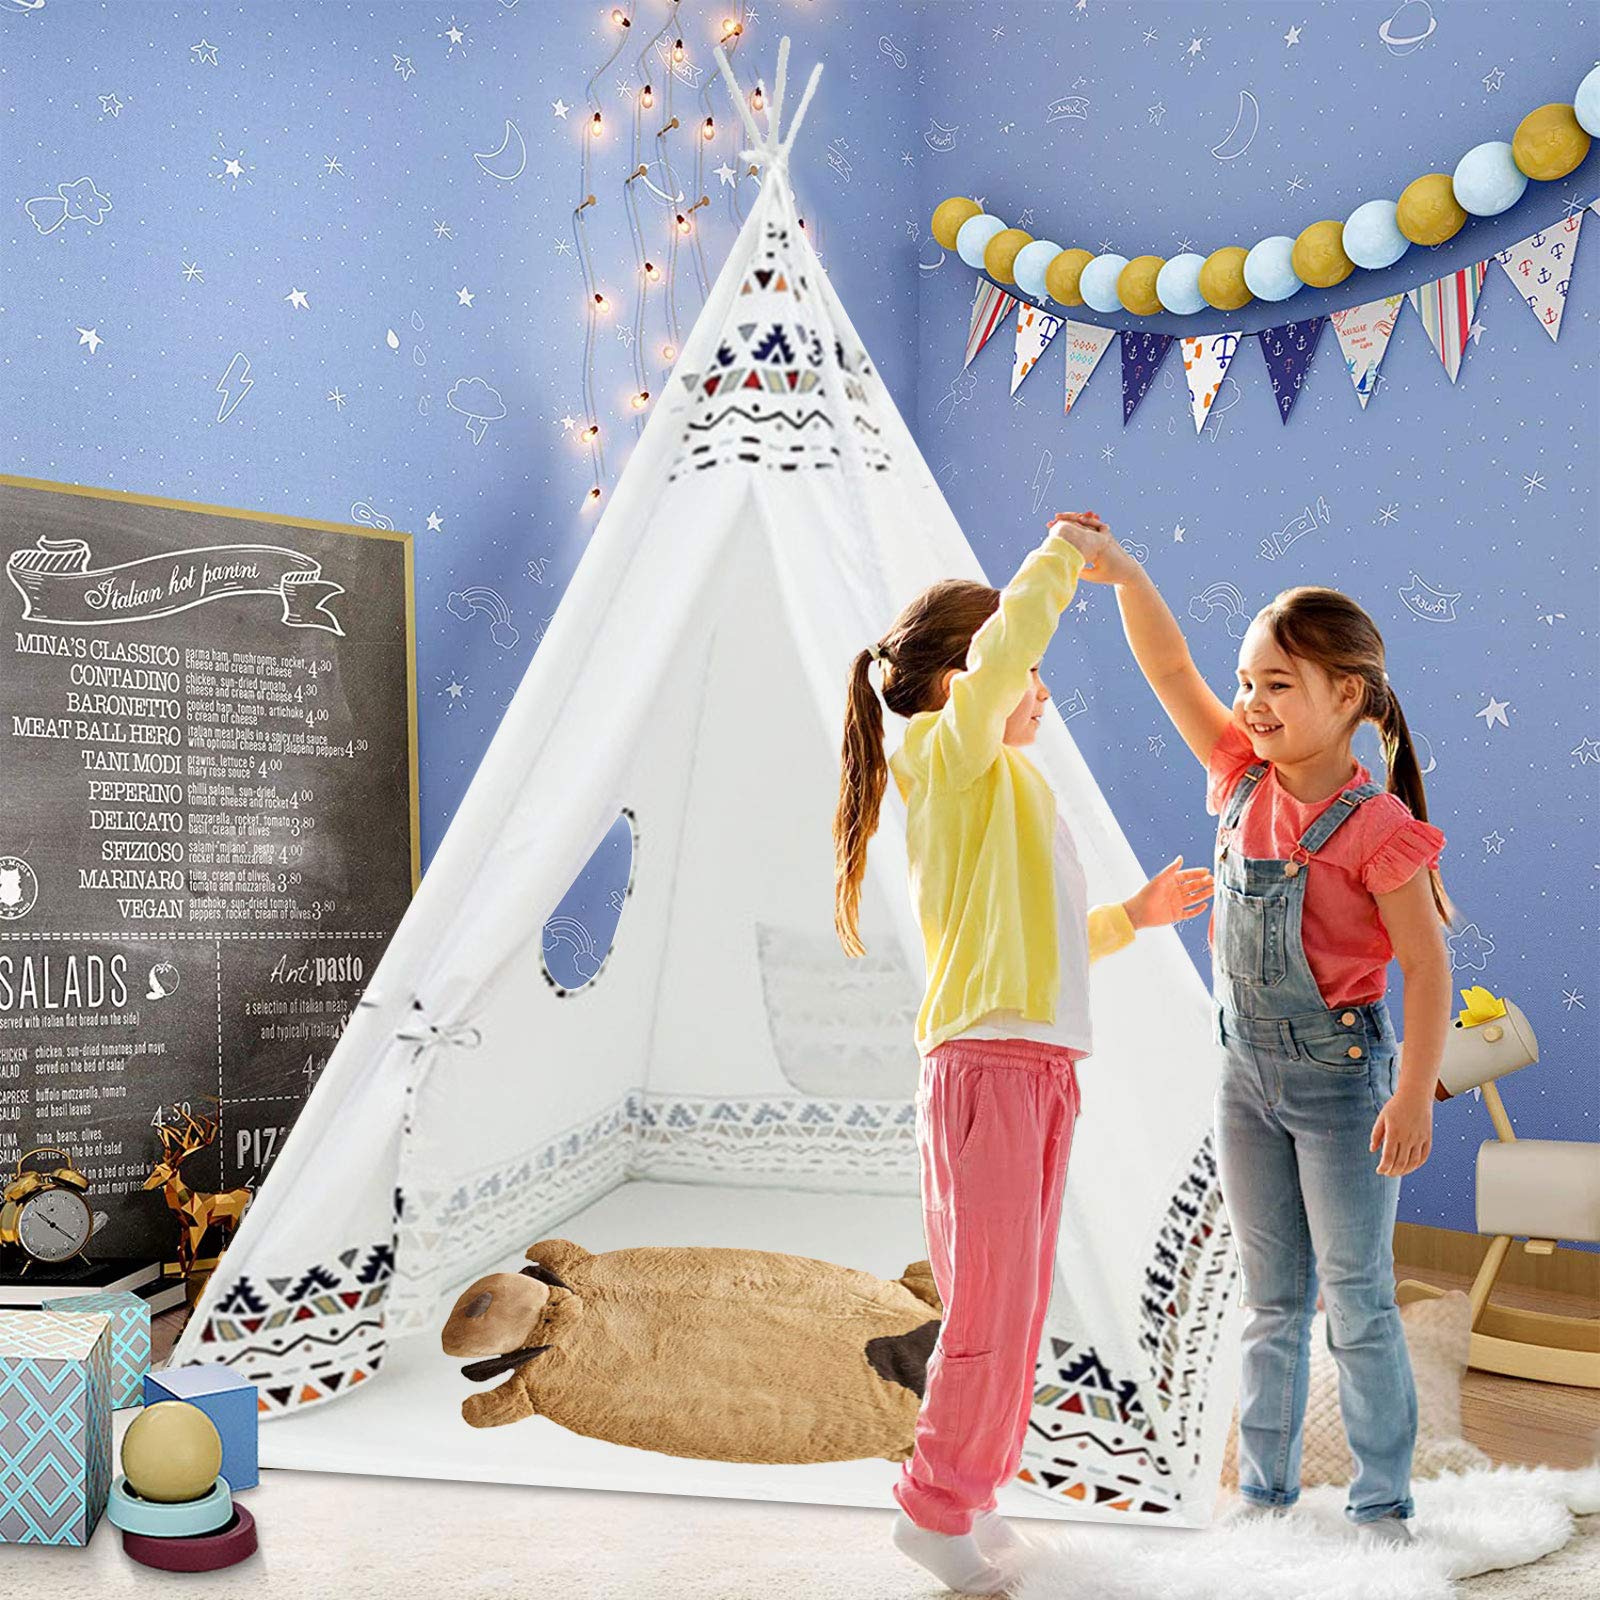 Reasonable price for Kids Outdoor Play Tent - Arkmiido Teepee Tent for Kids Raw White Canvas Teepee with Windows Carry Case Foldable Children Play Tents Playhouse Toys for Baby Toddler Girls/Boys ...